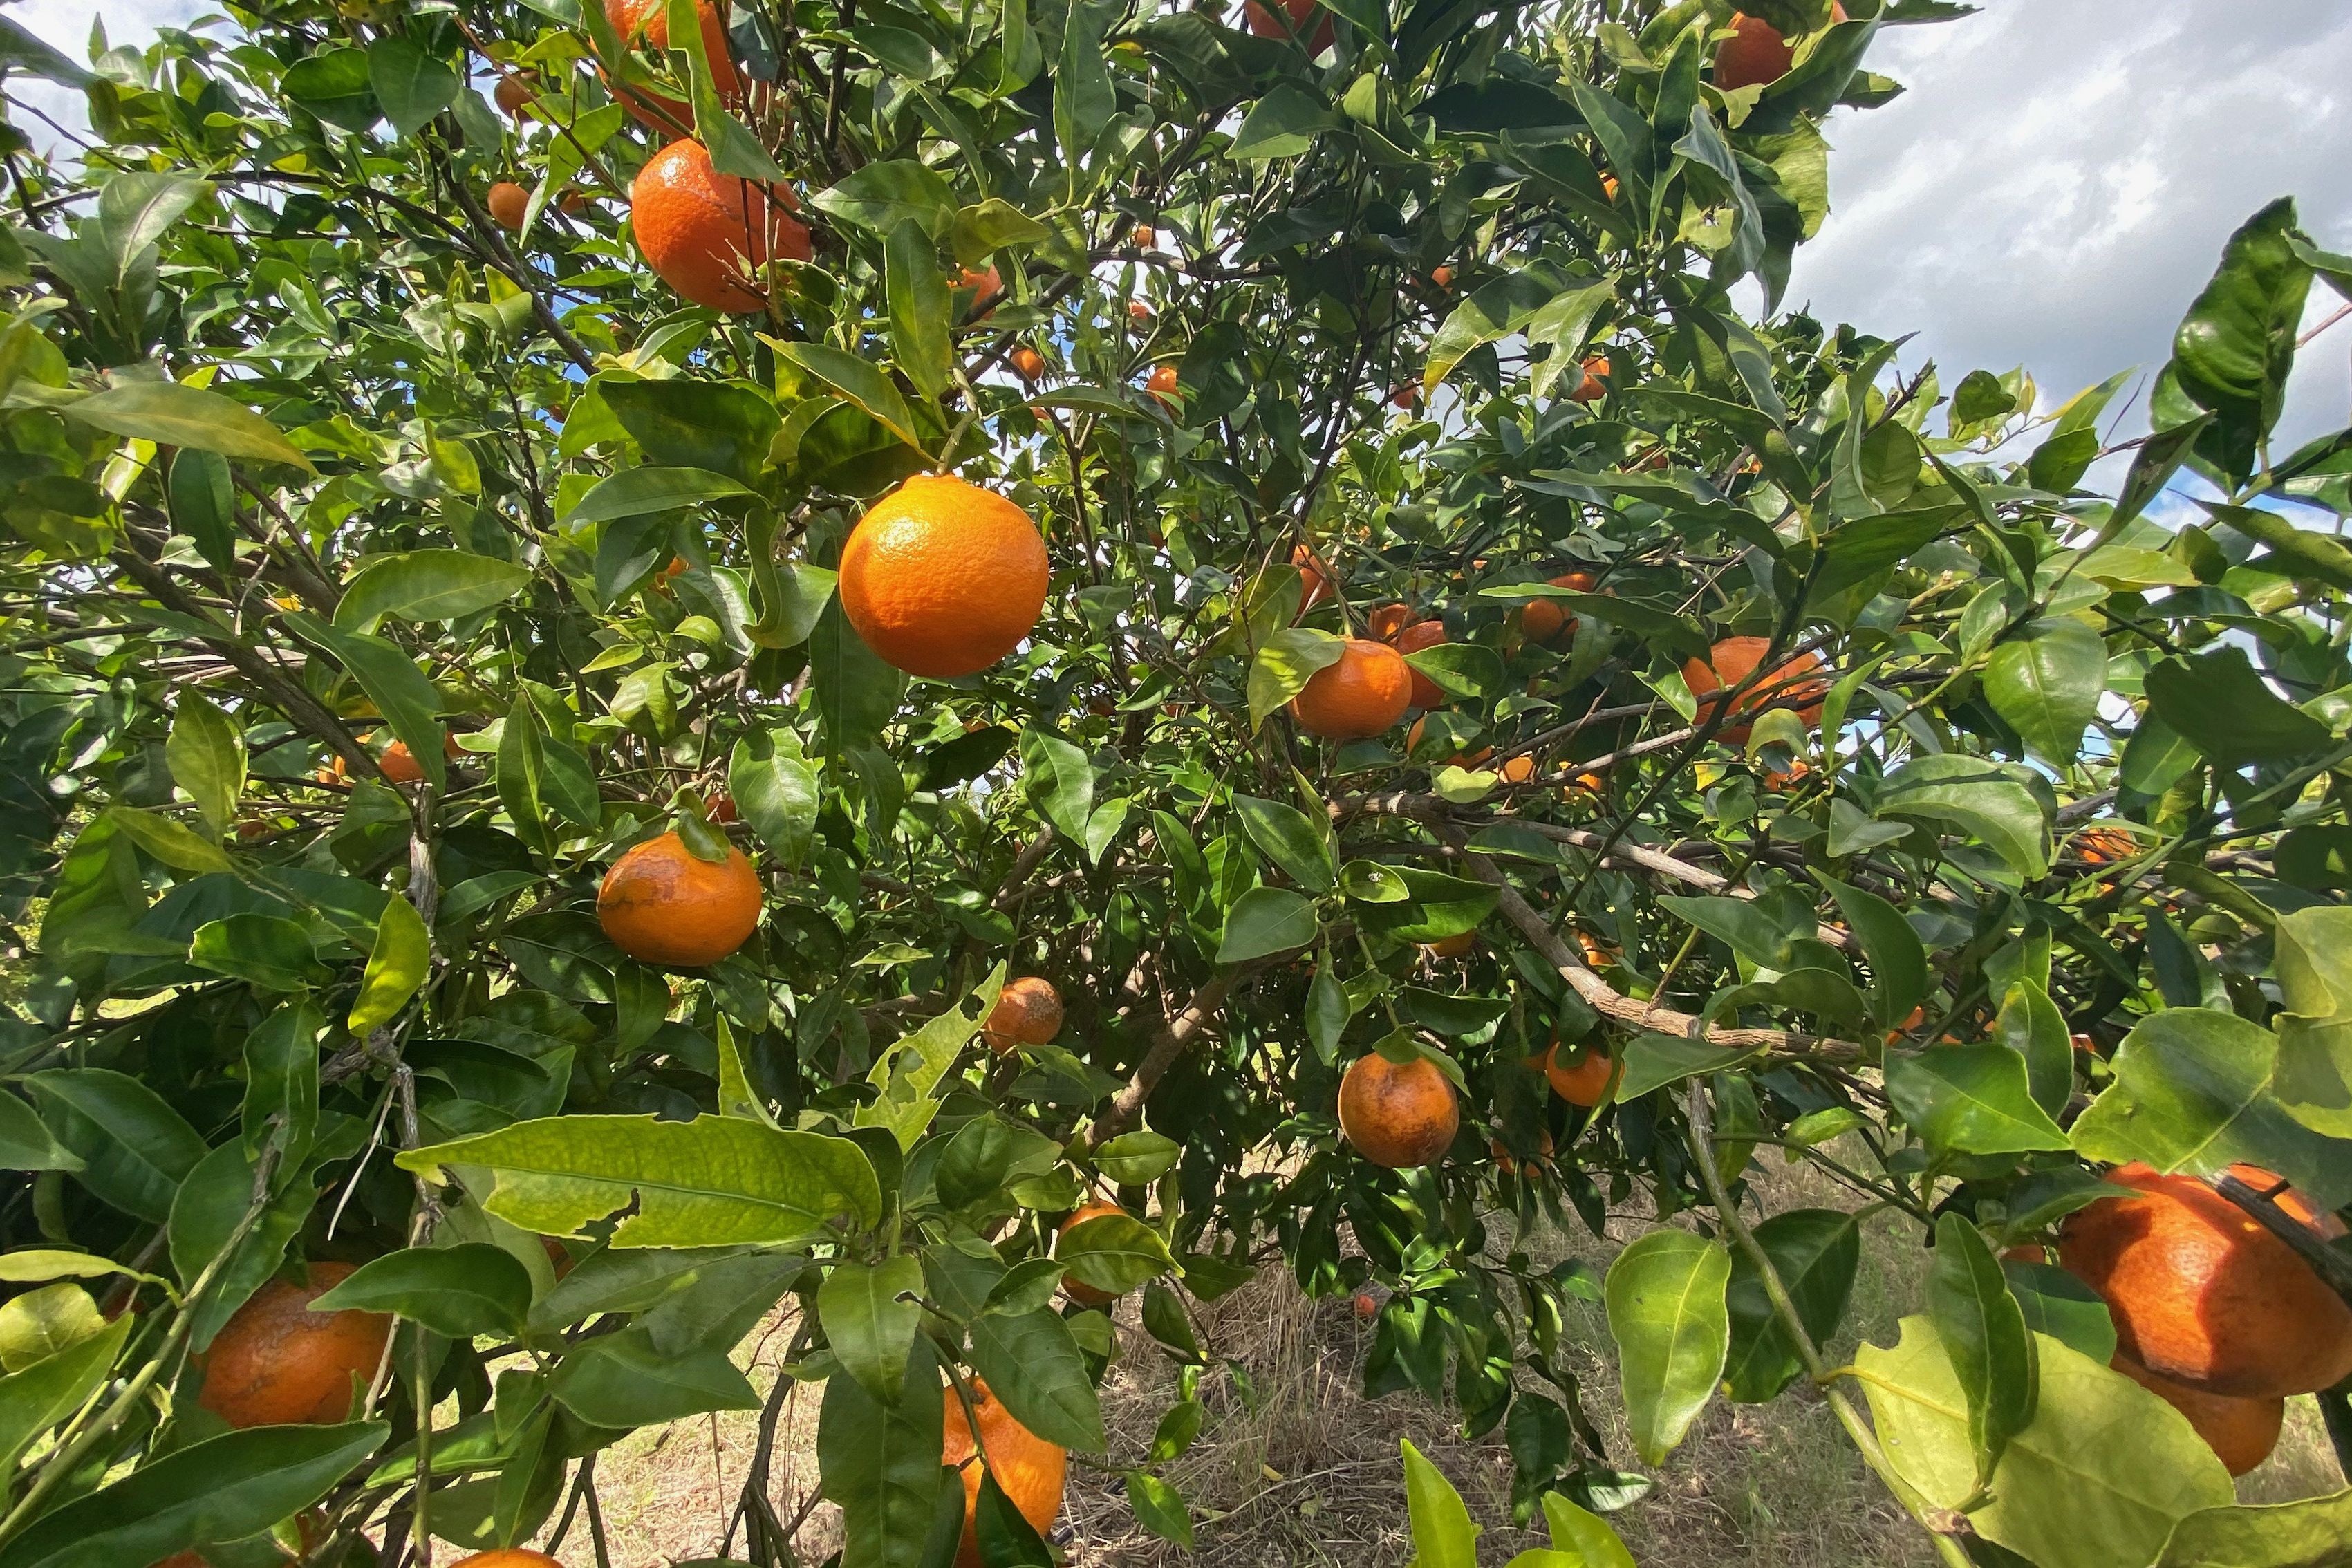 Florida's Annual Orange Crop Appears to Be Smallest Produced in Over 75